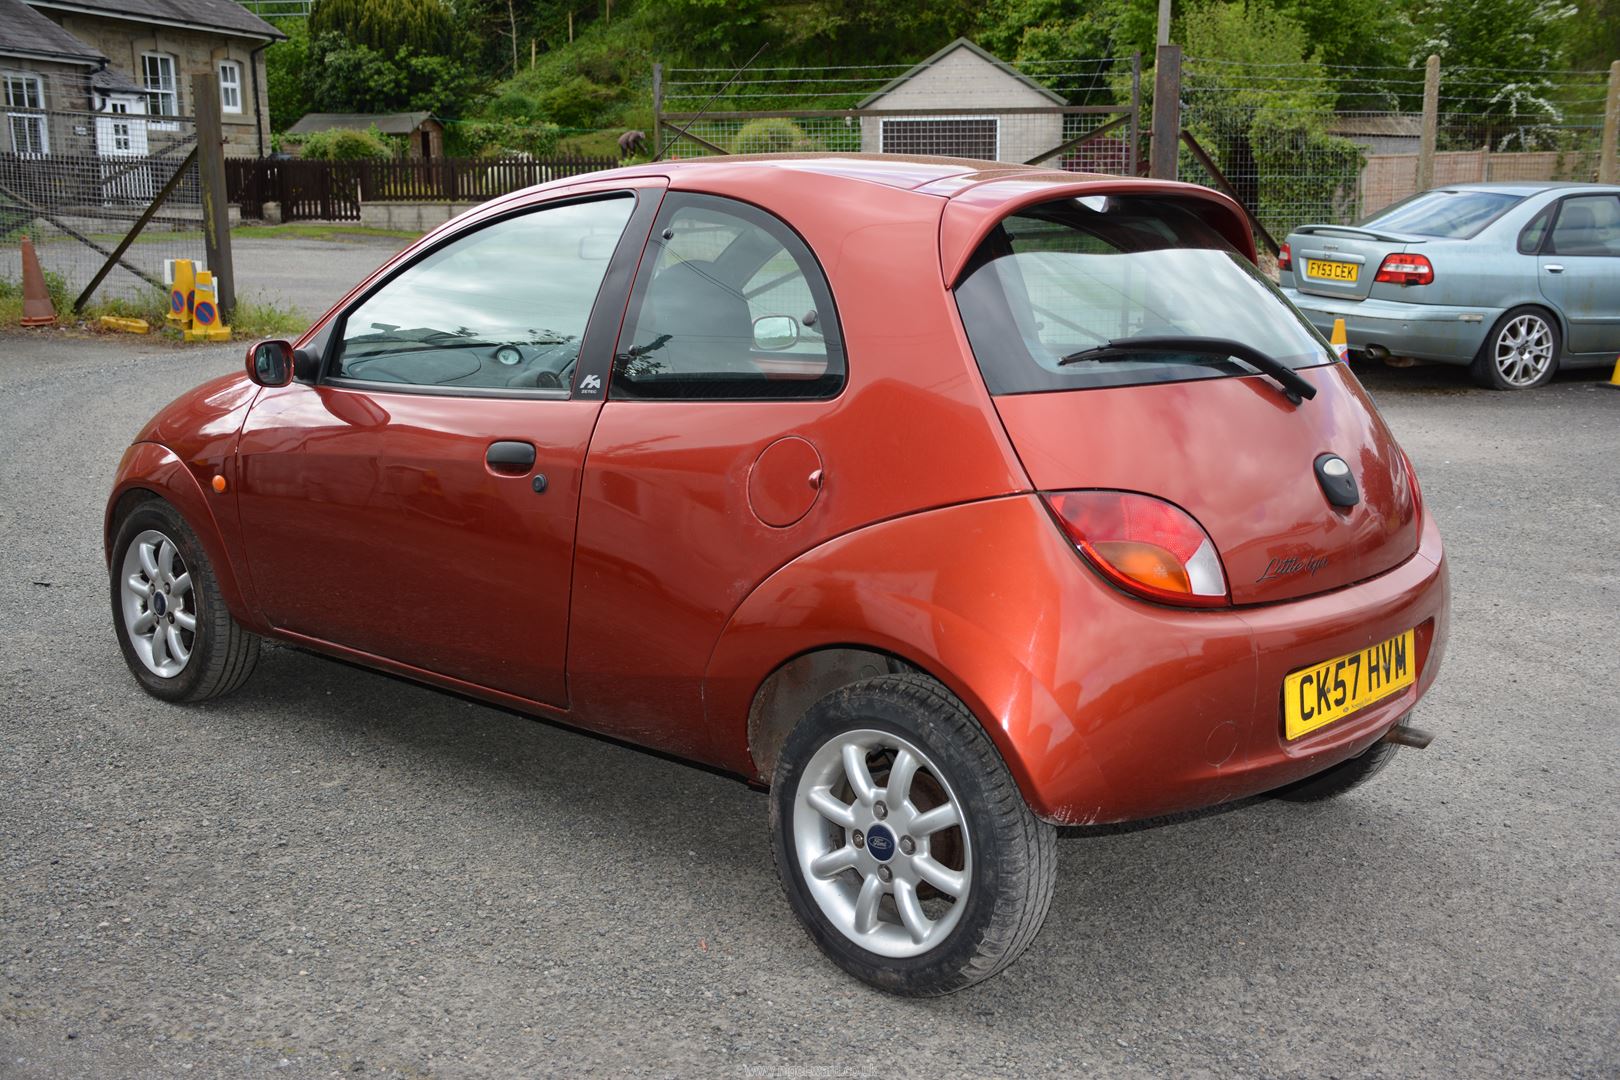 A Ford KA Zetec Climate 1299cc petrol-engined three door hatchback motor Car finished in red, - Image 5 of 14